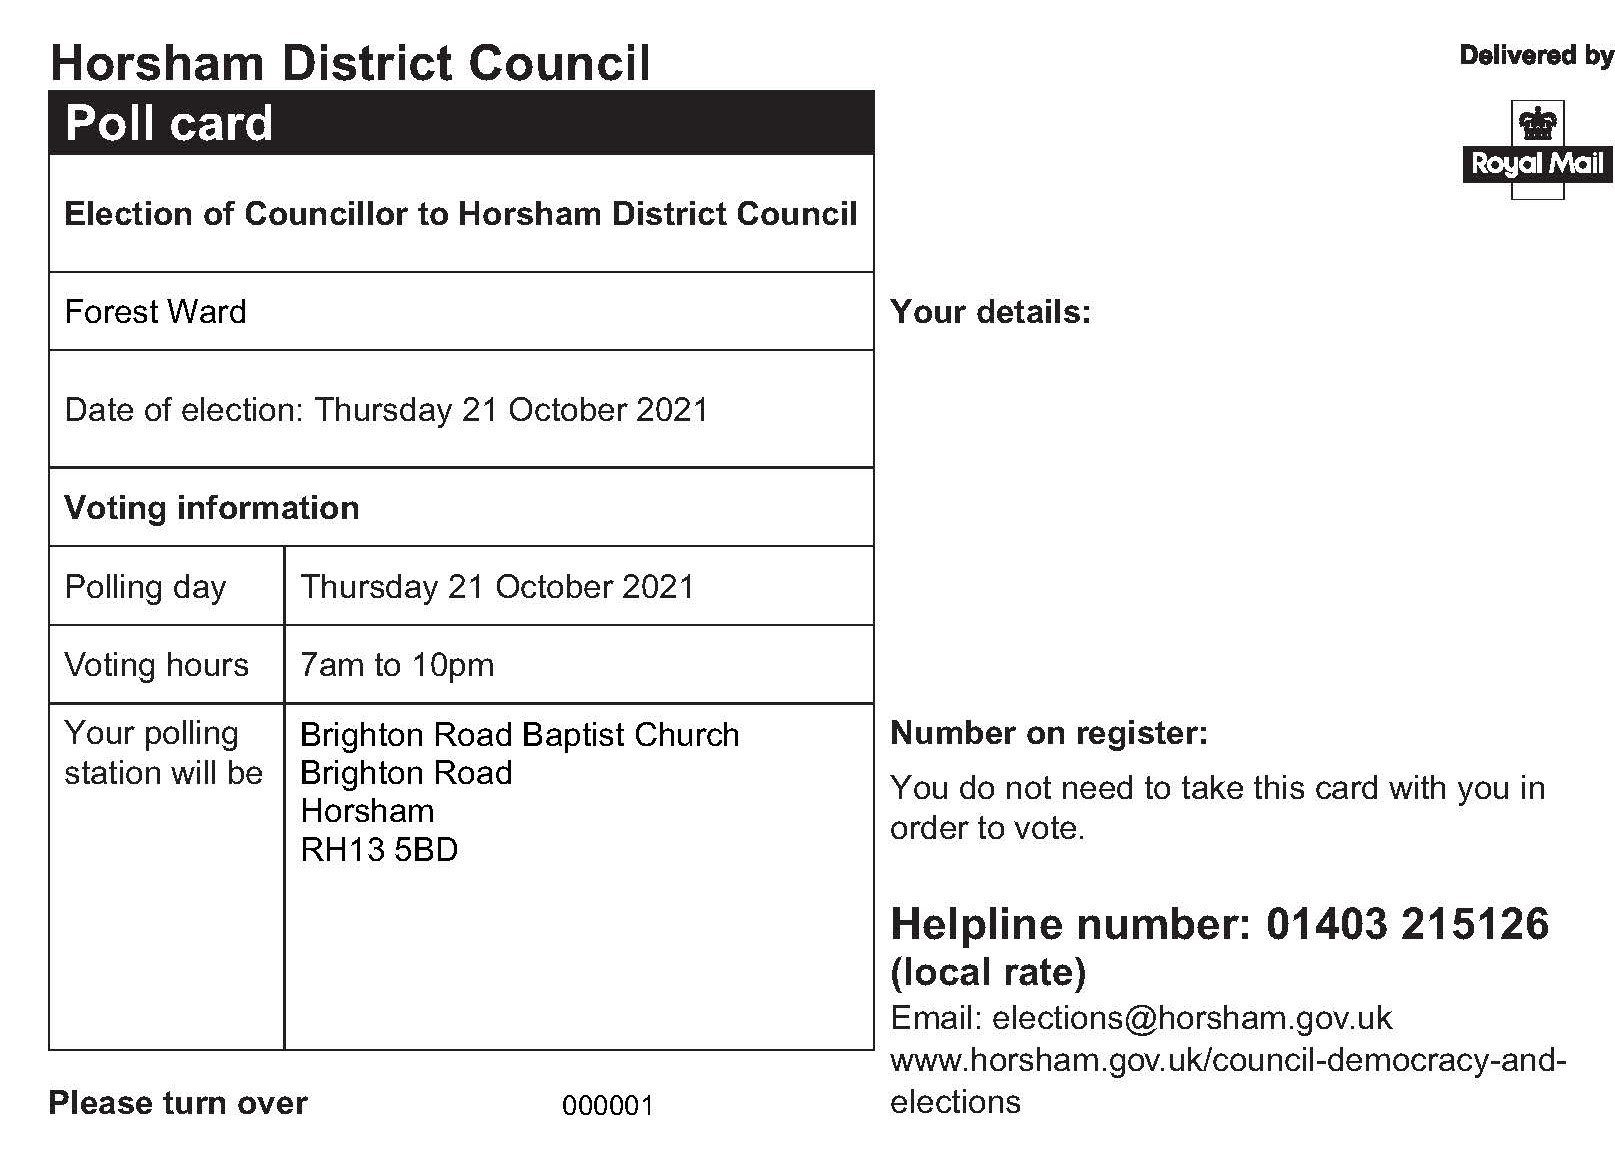 A polling card shows your polling station address, ward details and election date